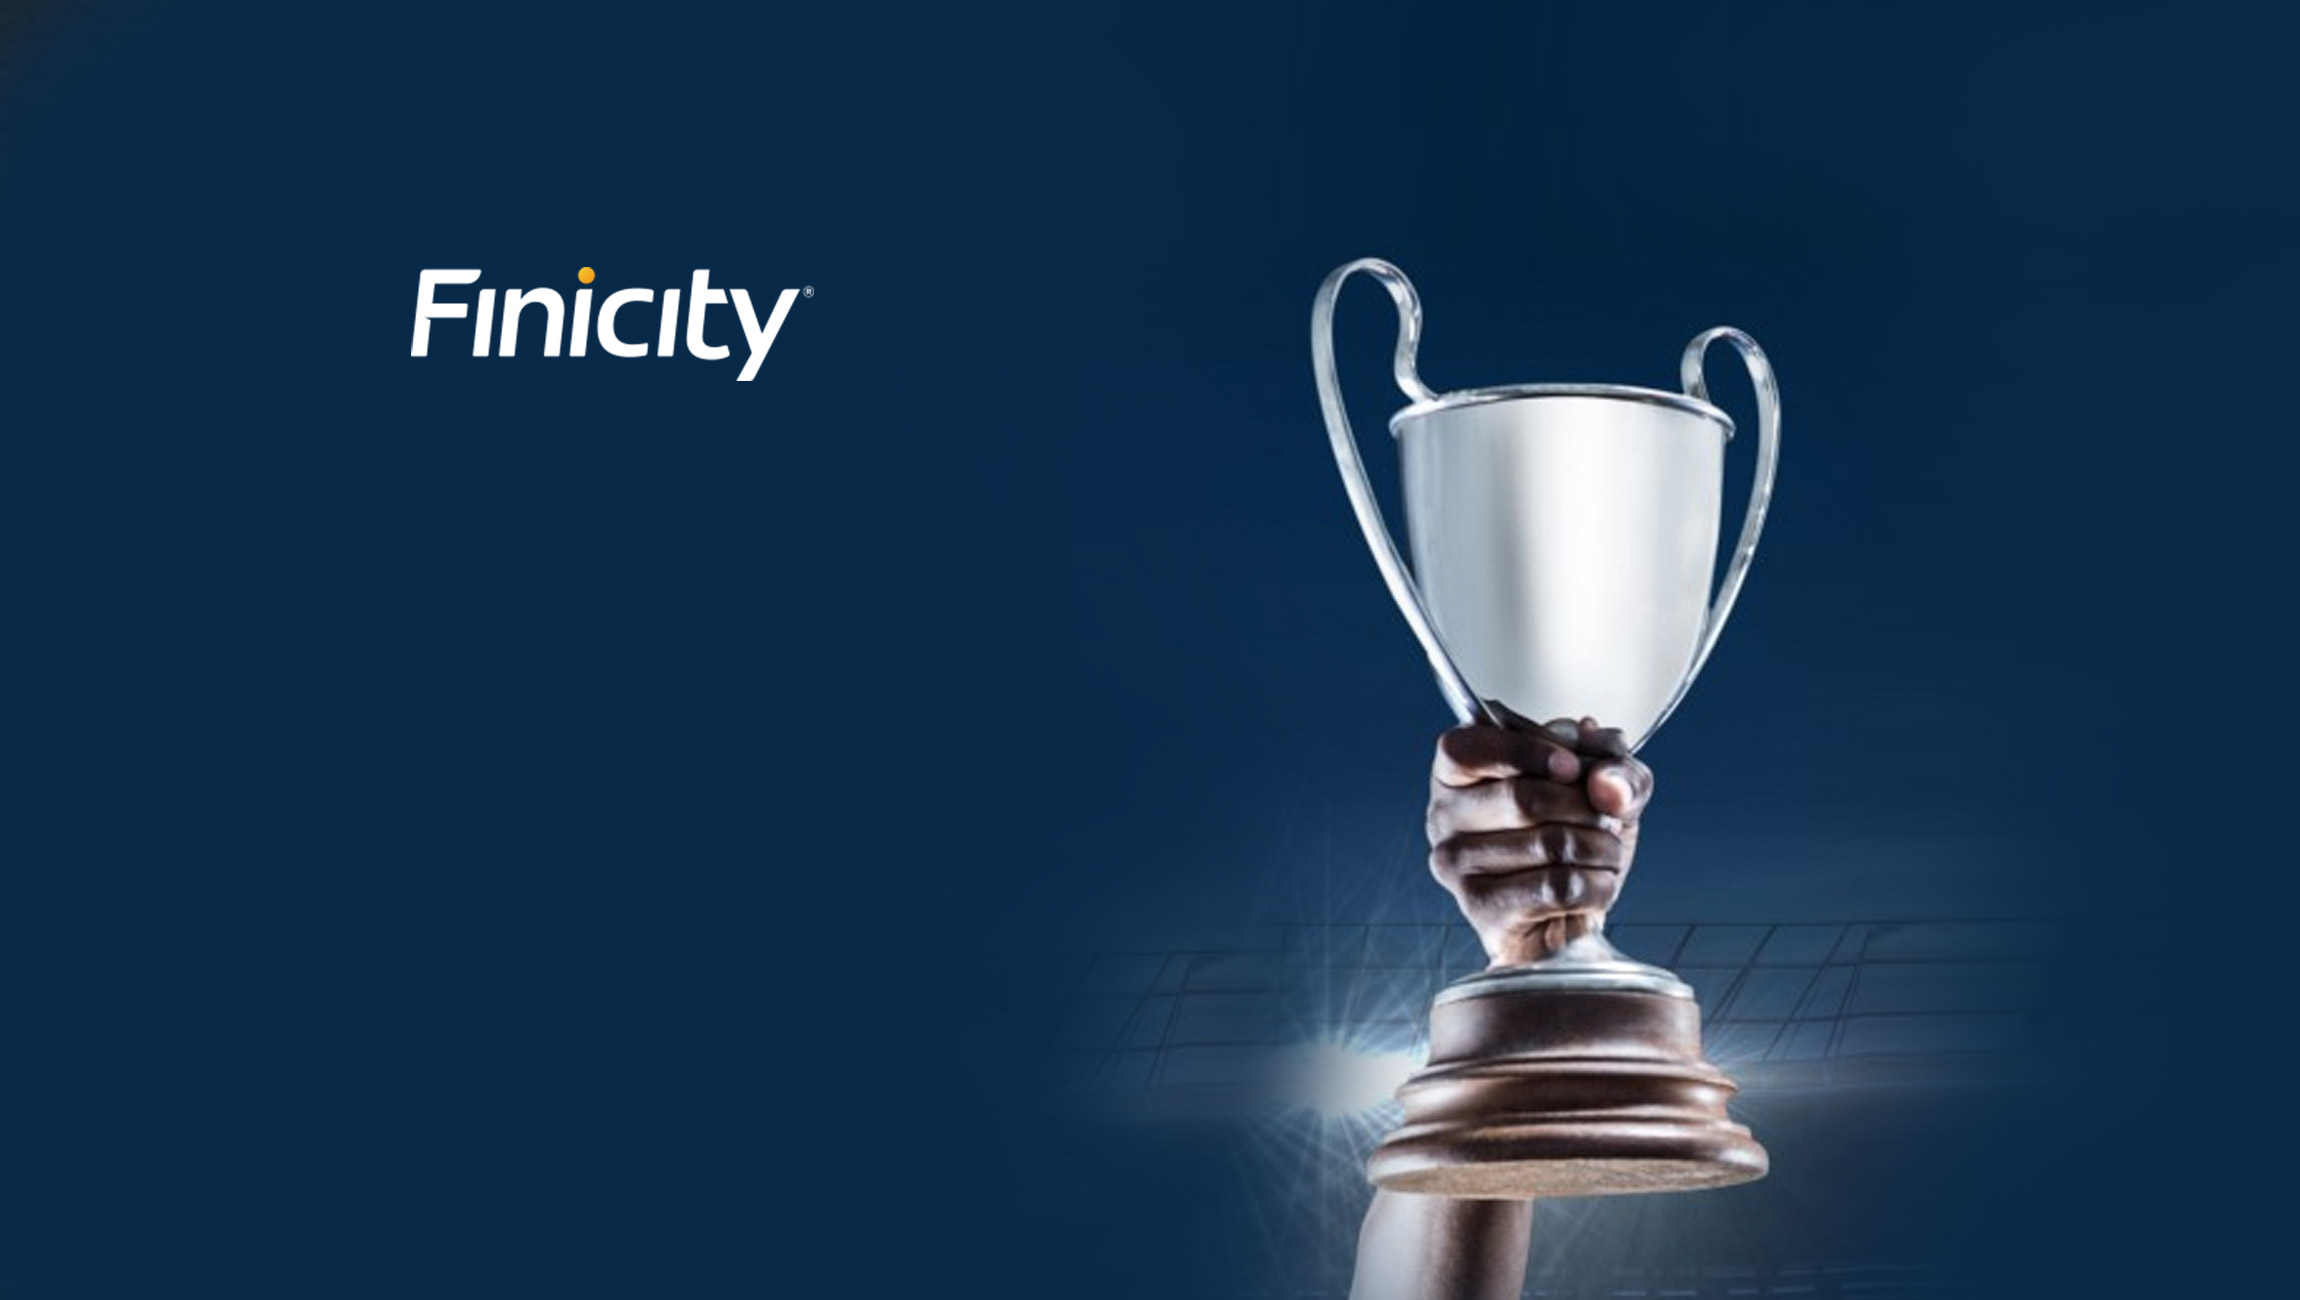 Finicity Awarded Best Company Culture for 2019 From Comparably